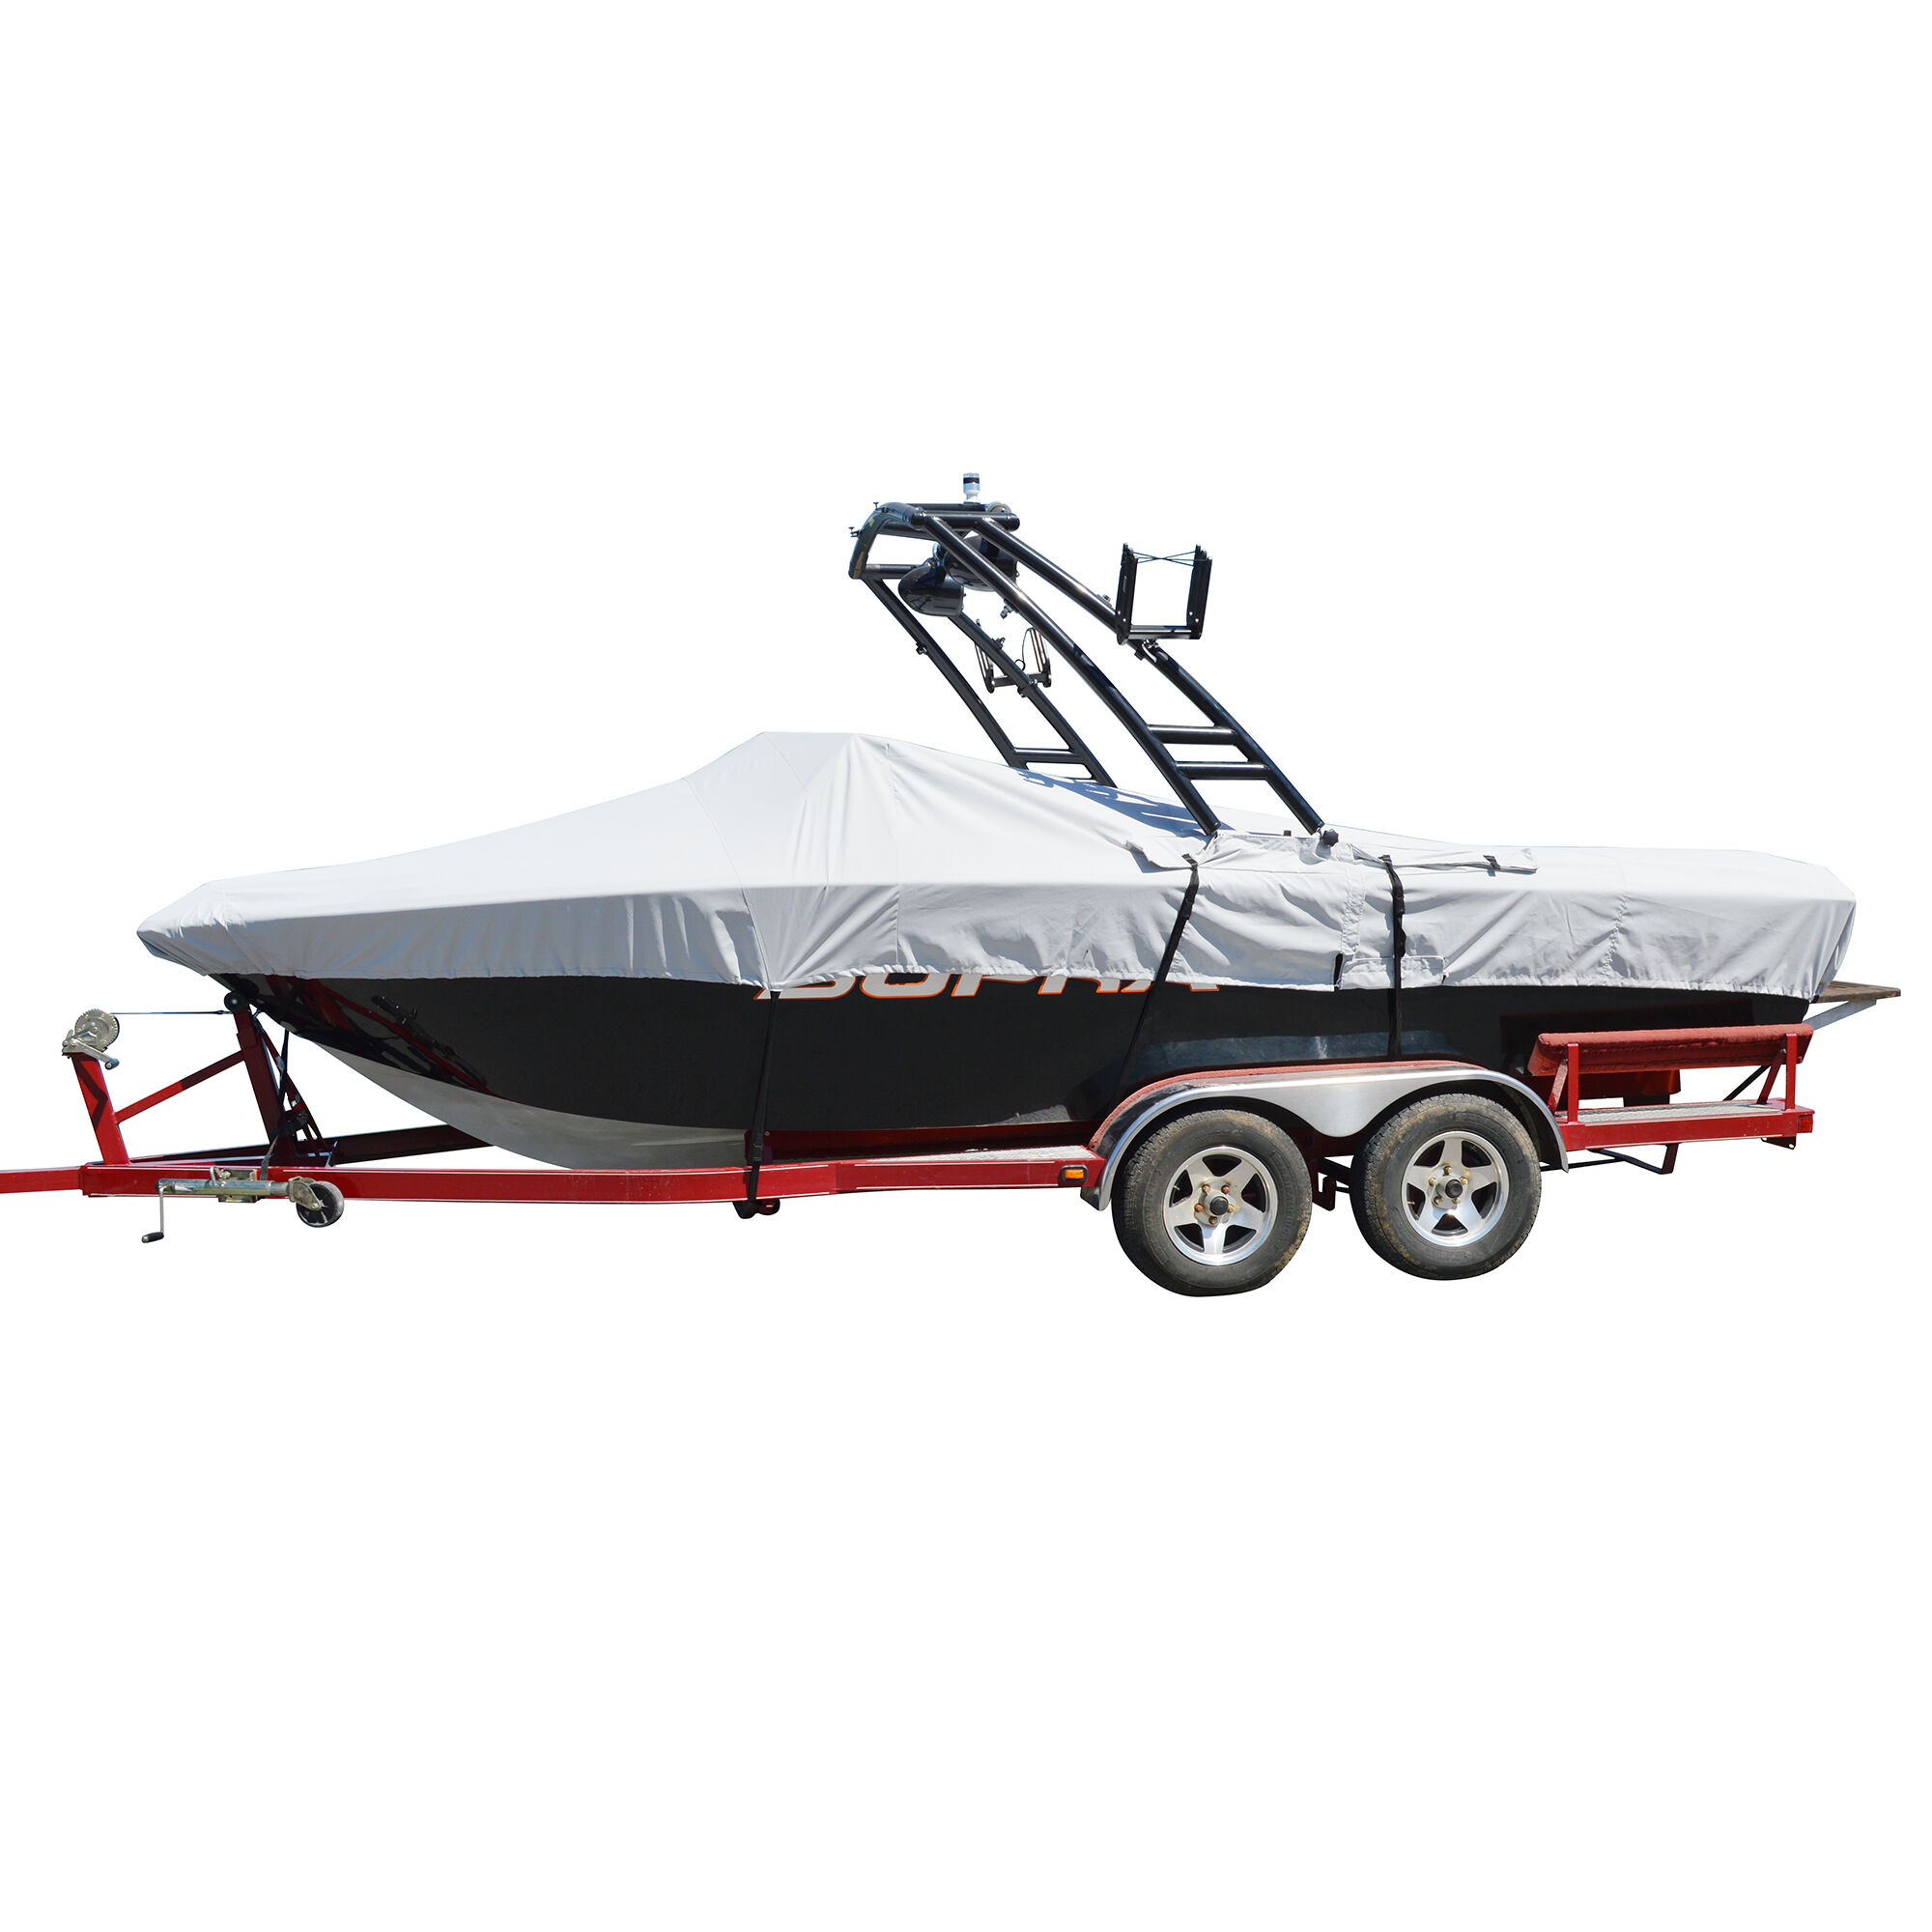 Westland Tower-All Select-Fit I/O Tournament Ski Boat Cover, 21'5" max length, 102" beam in Grey